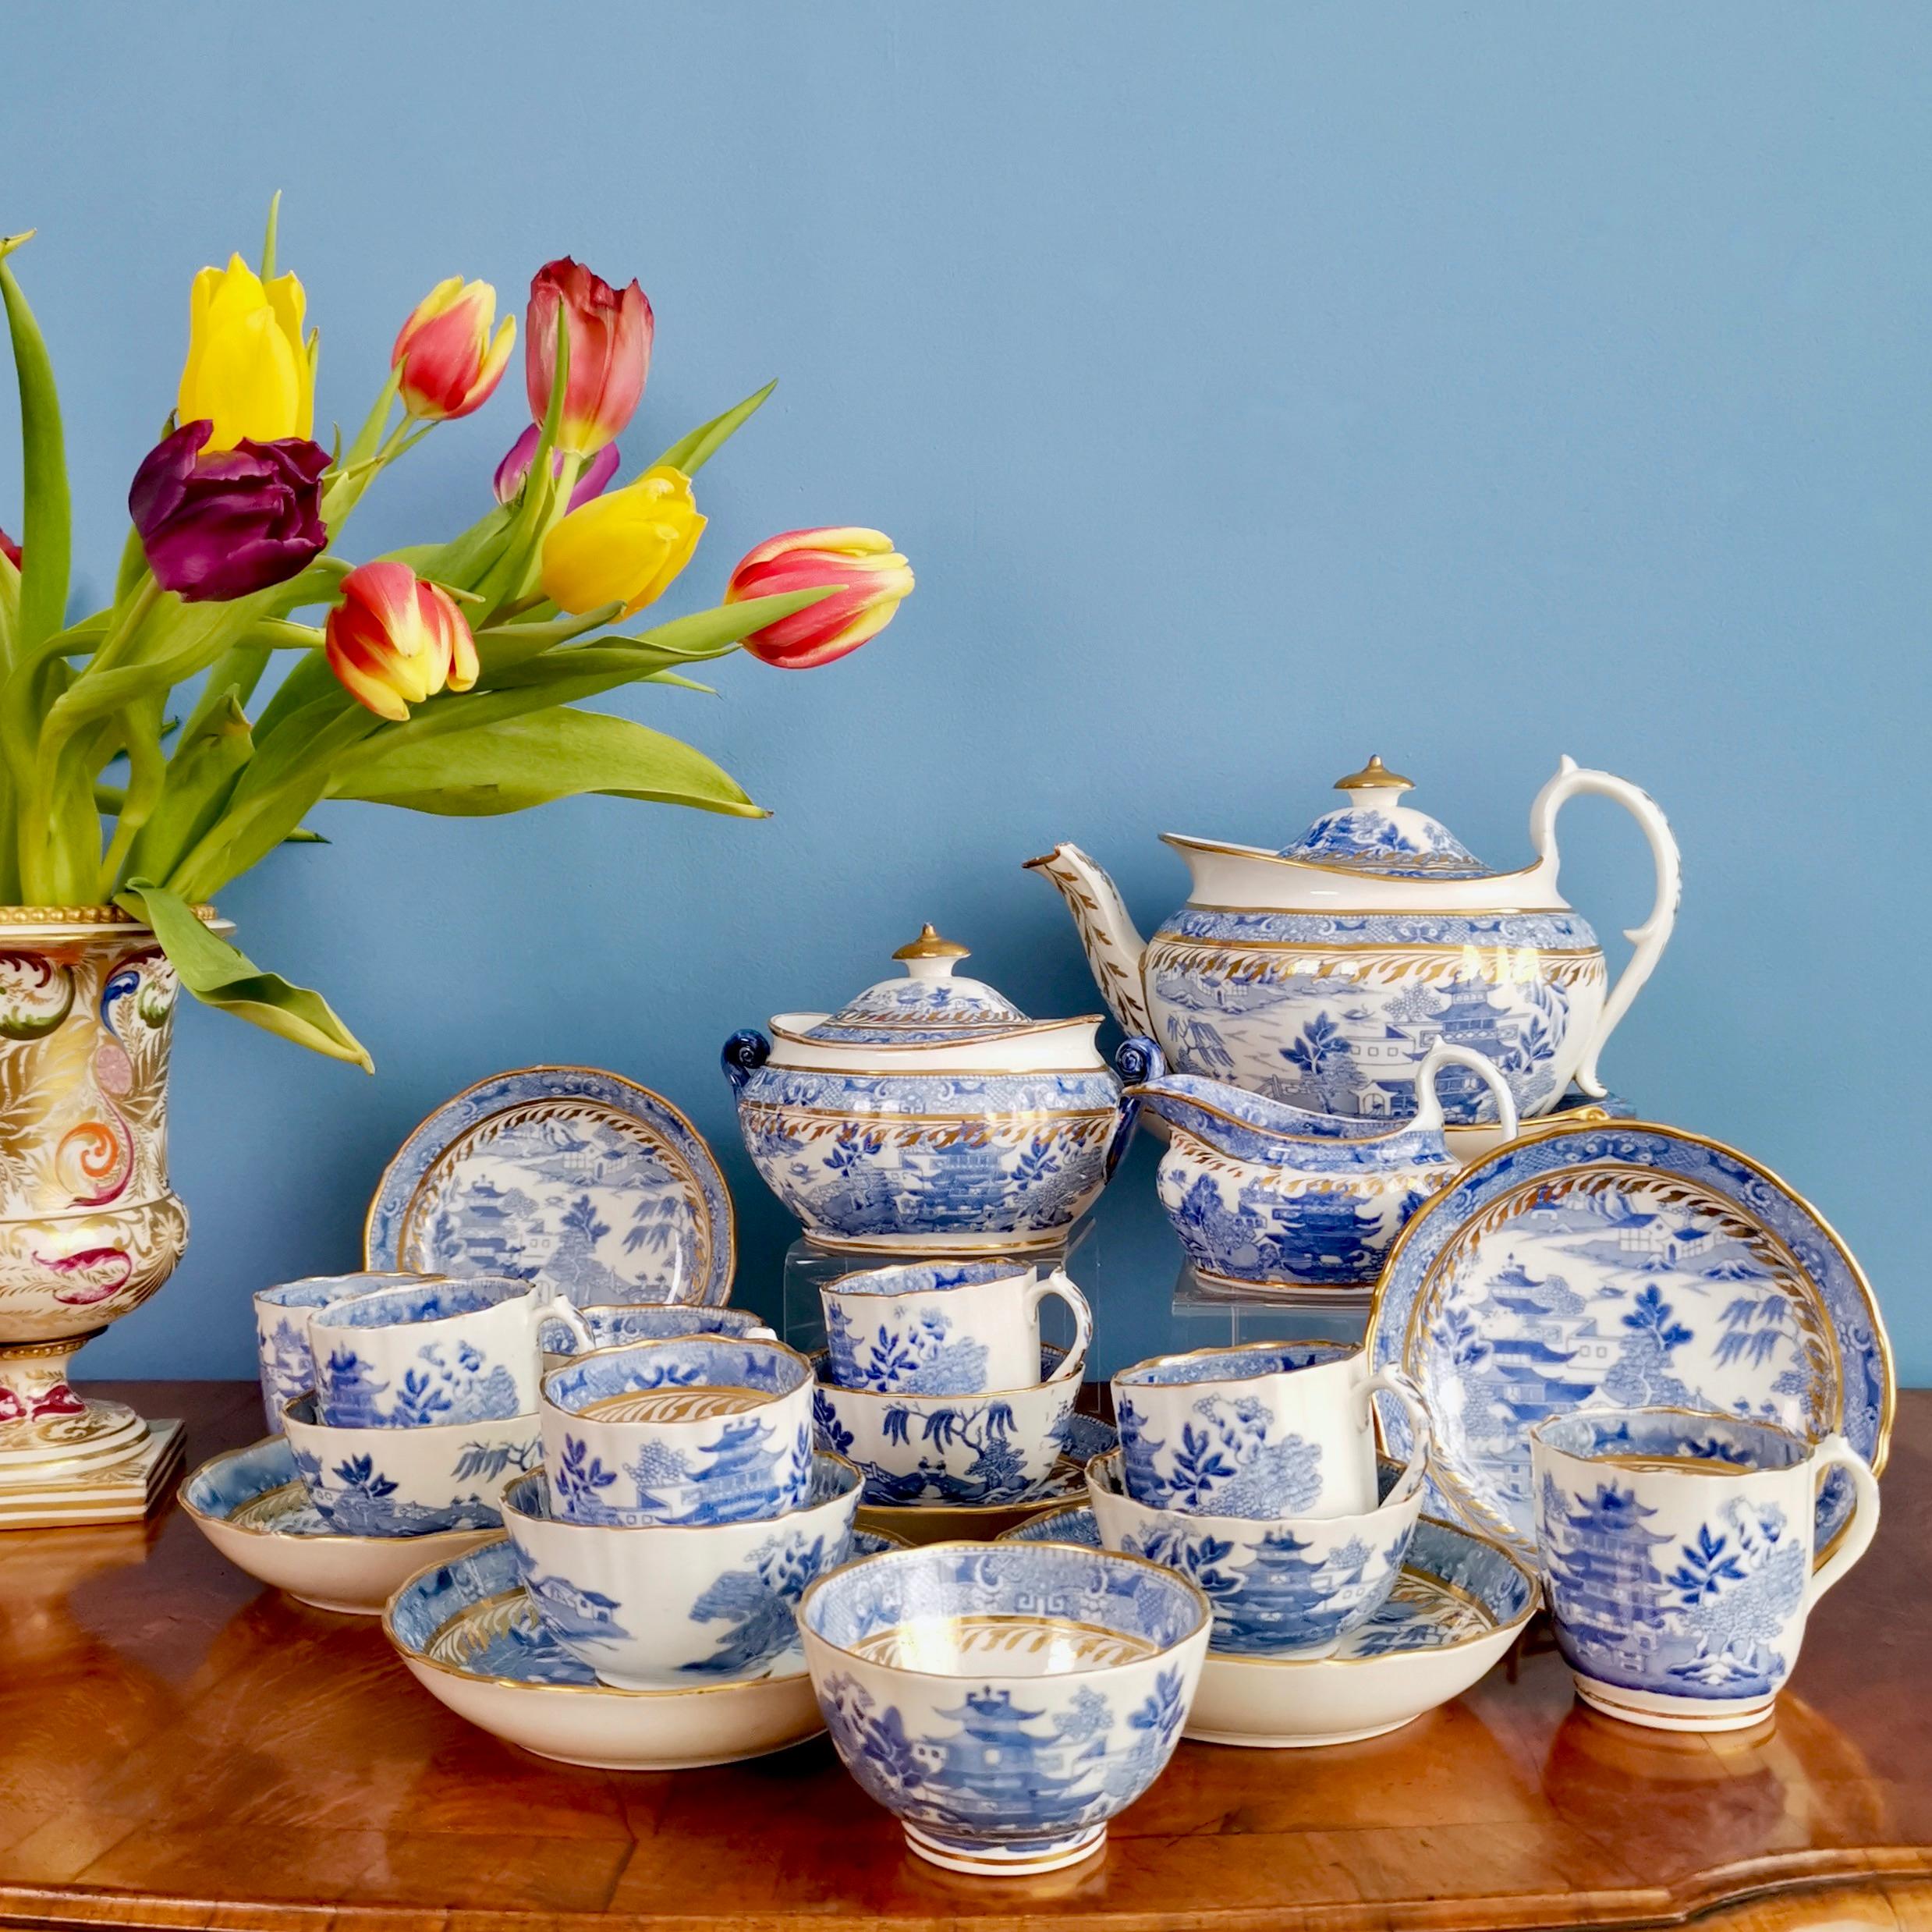 This is a gorgeous full tea service serving six made by Miles Mason circa 1810, which was the Regency era. The items are decorated with the famous Pagoda pattern in blue and white transfer and a gracious gilt detail.

This service has provenance,